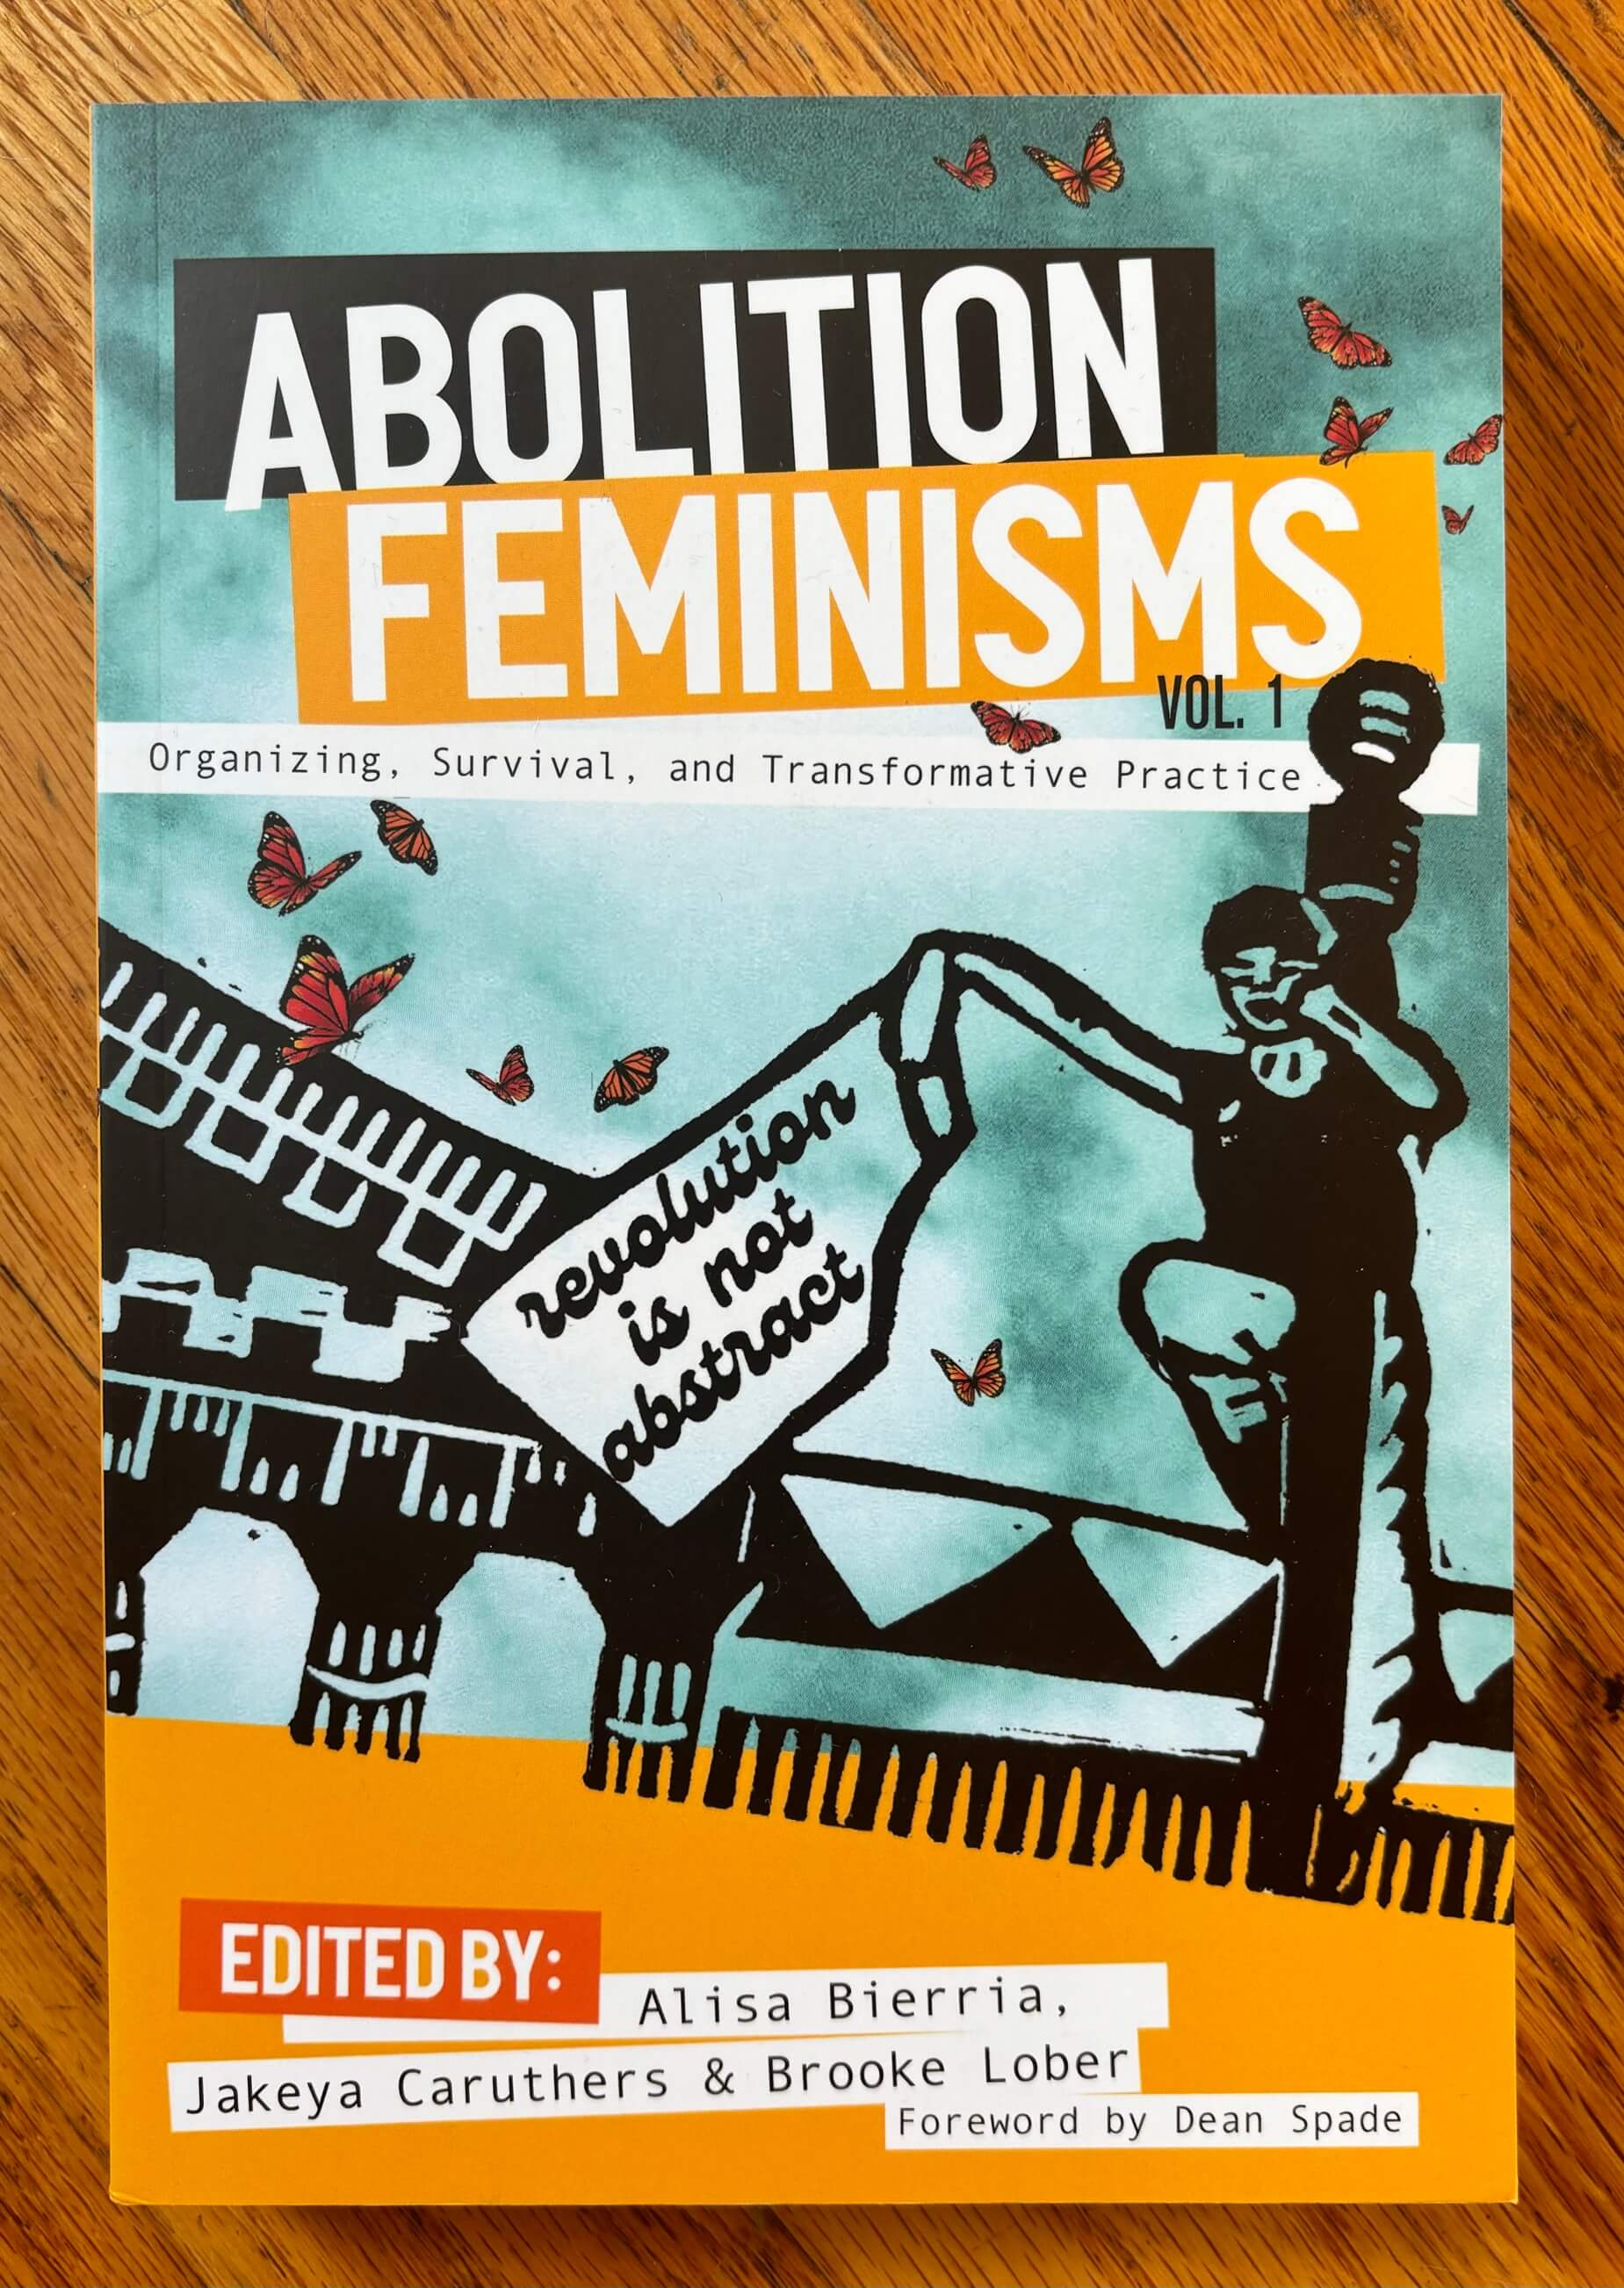 “Abolition Feminisms Vol 1: ORganizing, Survivial, and Transformative Practice” edited by Alisa Bierria, Jakeya Caruthers & Brooke Lober